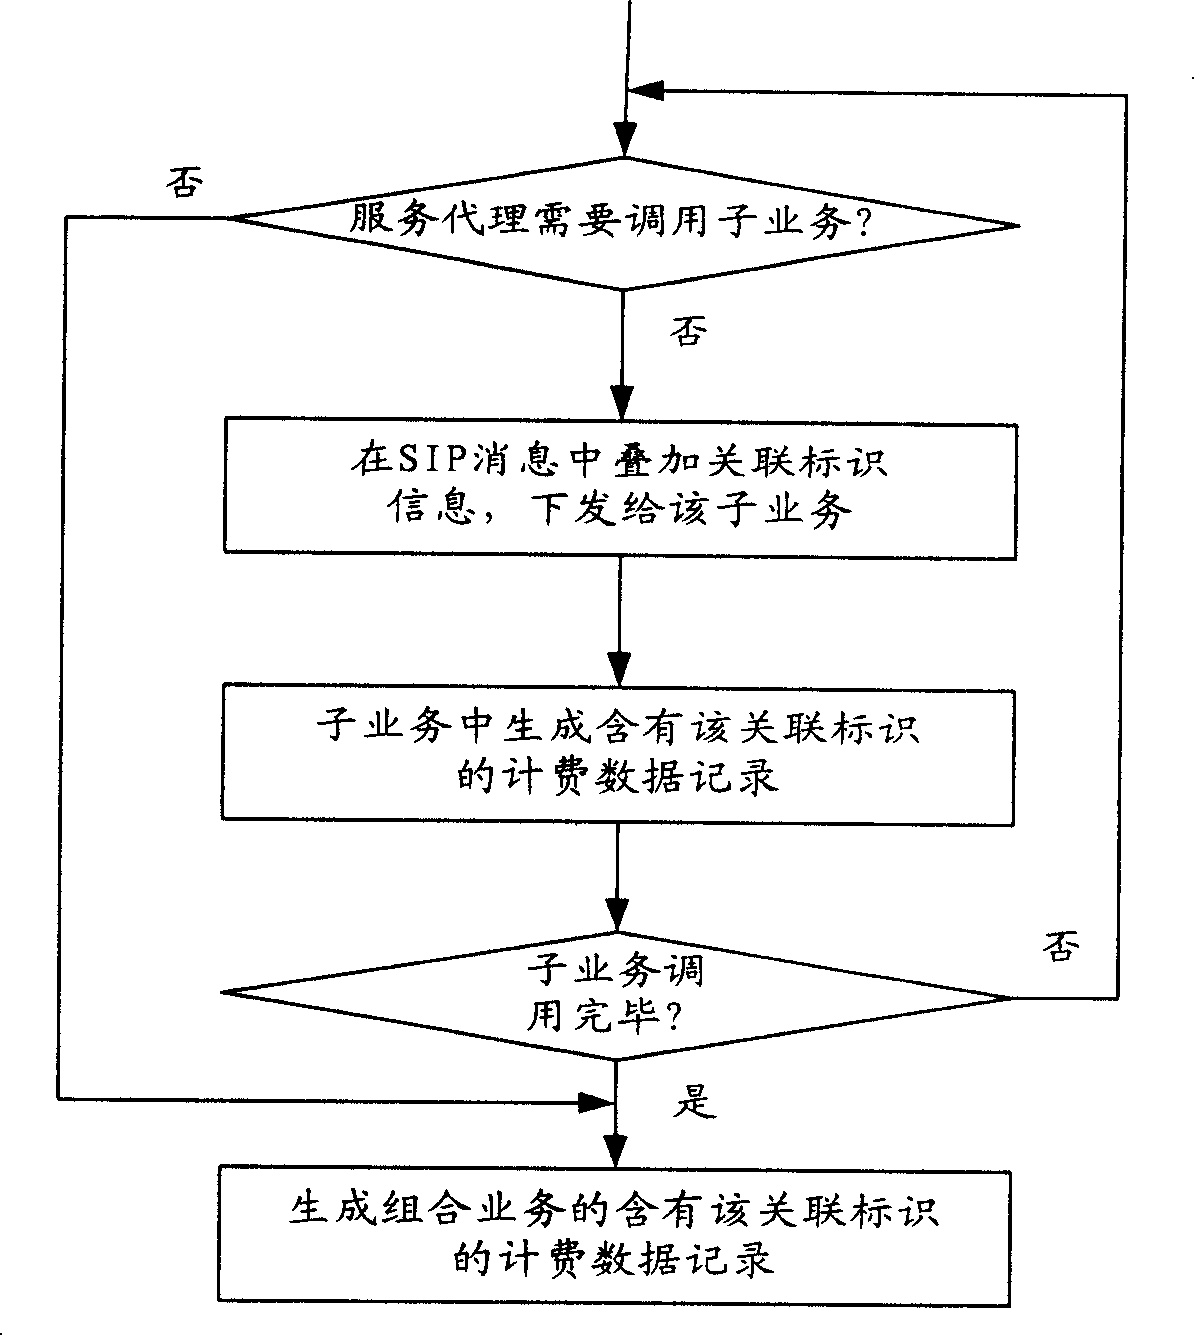 A combined service charging method and the corresponding service agencies